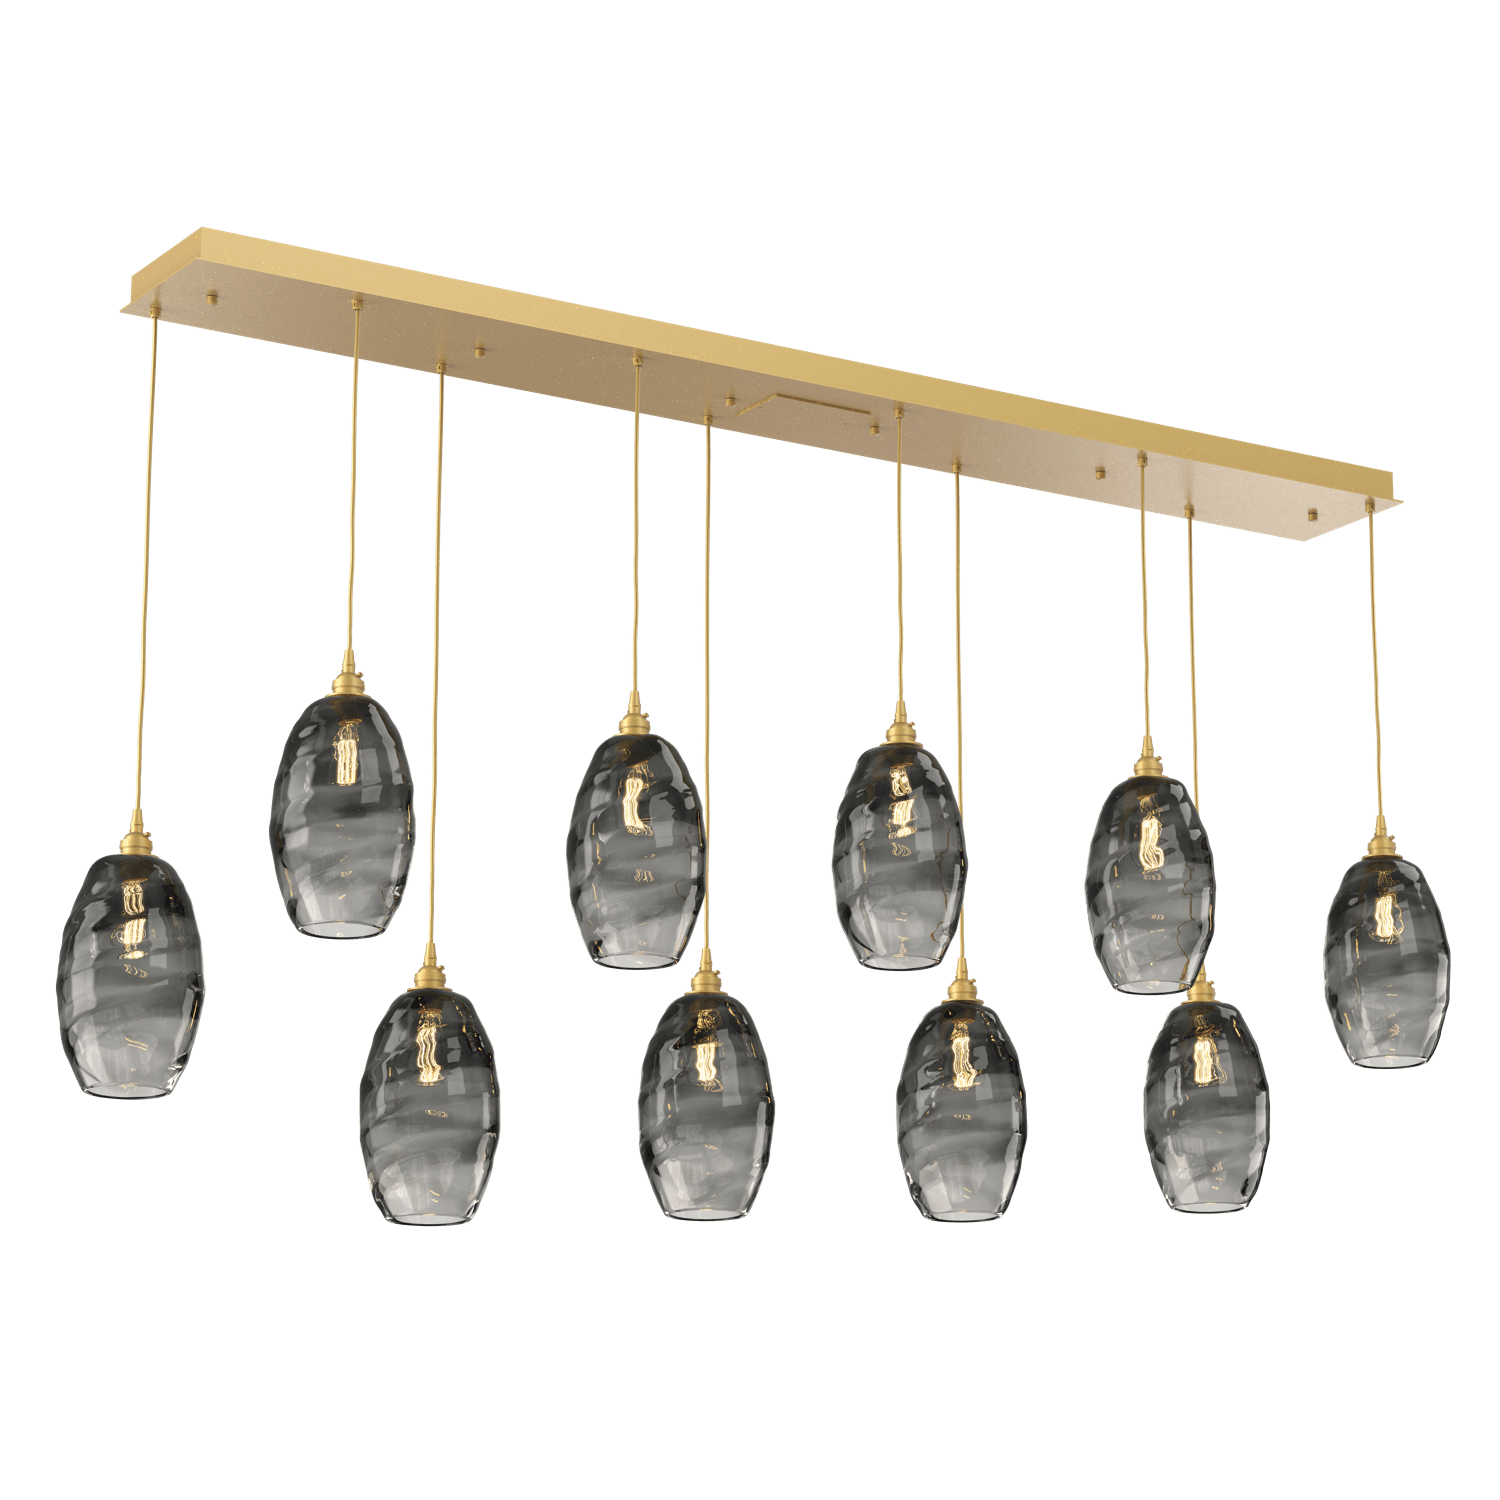 PLB0035-10-GB-OS-Hammerton-Studio-Optic-Blown-Glass-Elisse-10-light-linear-pendant-chandelier-with-gilded-brass-finish-and-optic-smoke-blown-glass-shades-and-incandescent-lamping